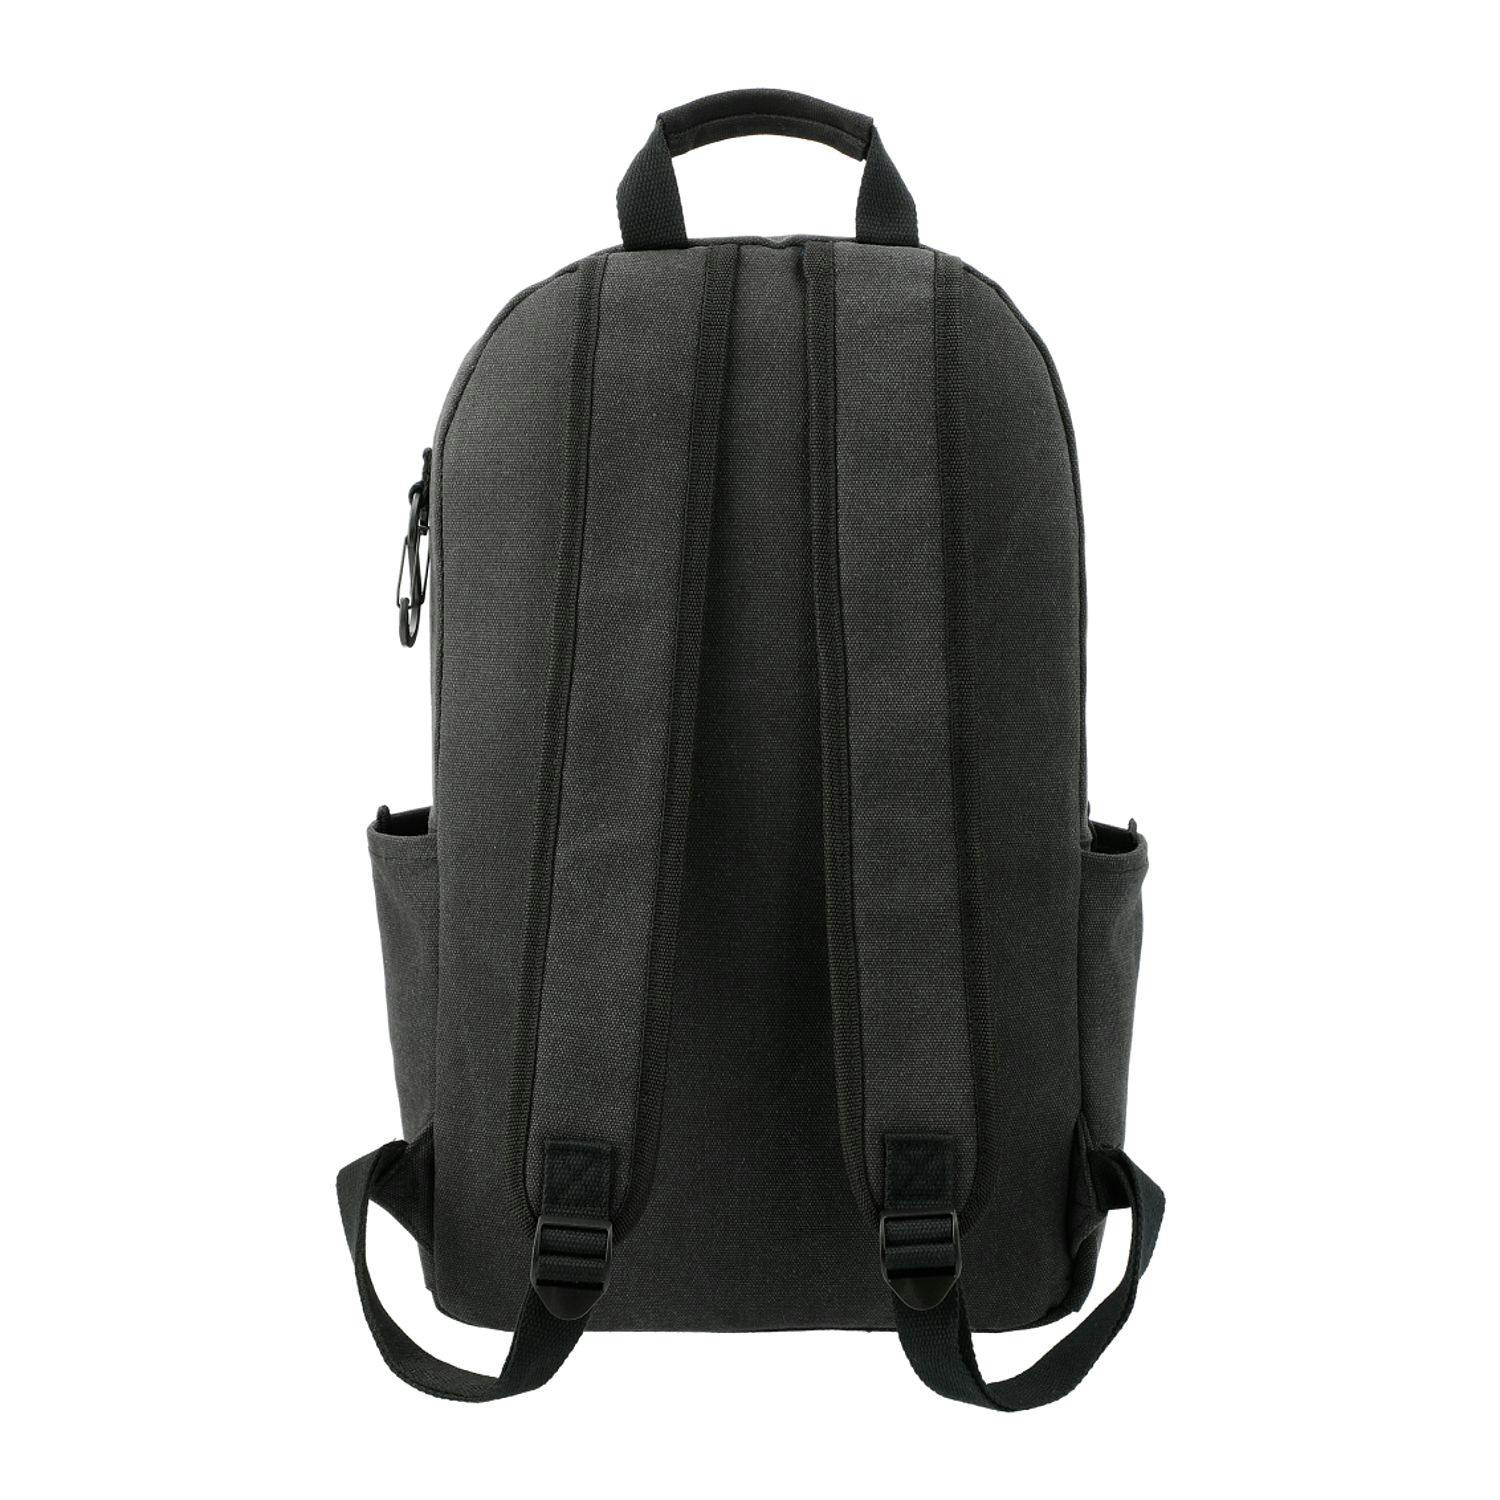 Field & Co. Woodland 15" Computer Backpack - additional Image 2